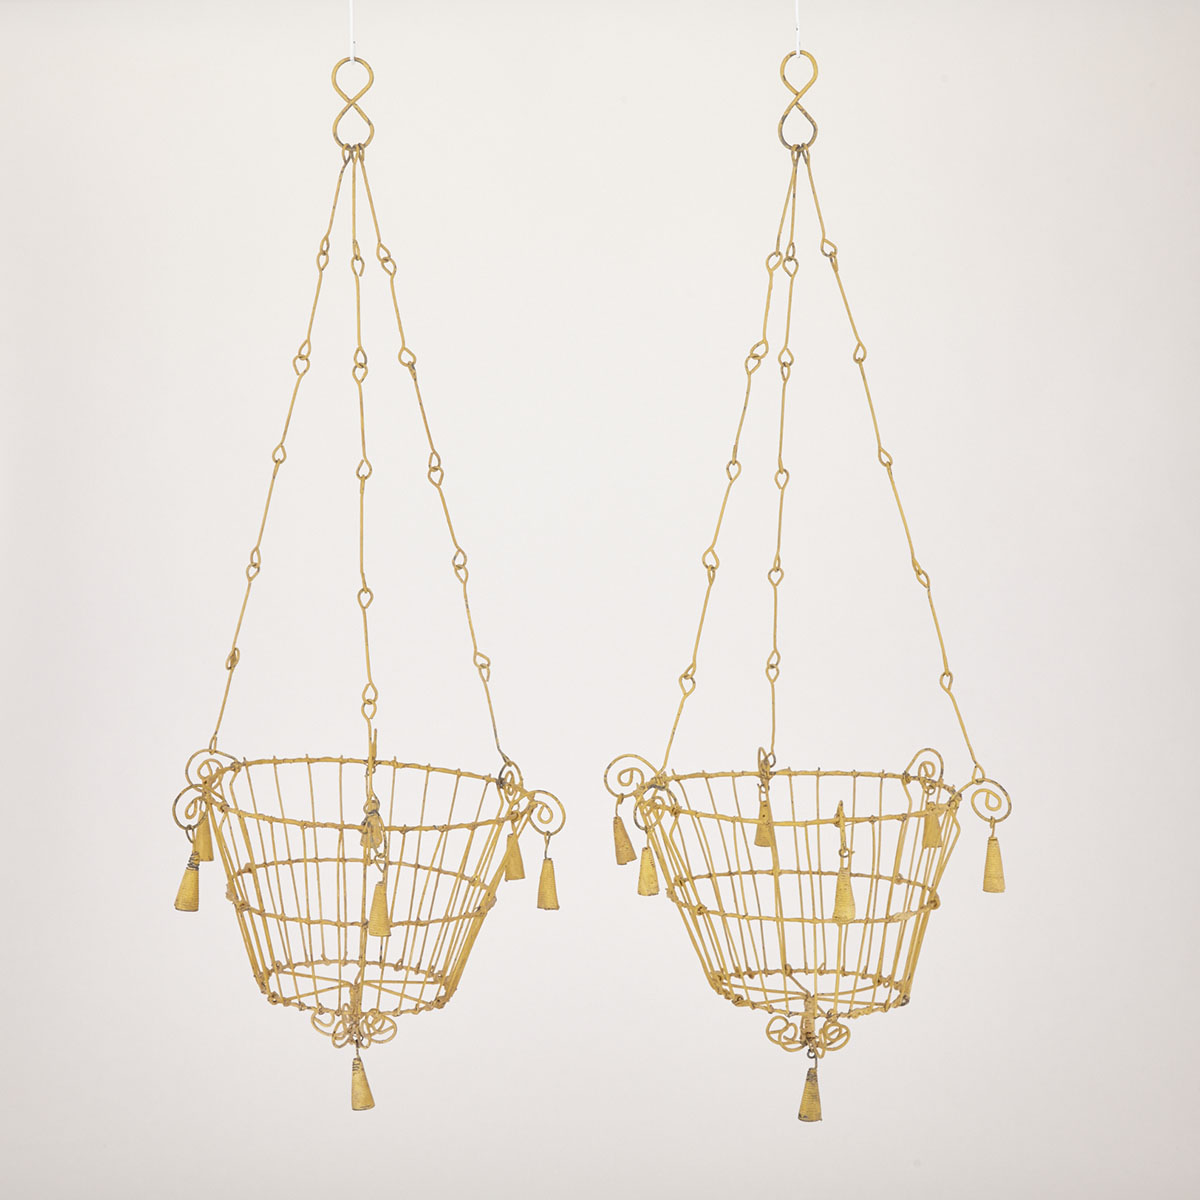 Pair of Painted Wire Hanging Planter Baskets, 19th/early 20th century